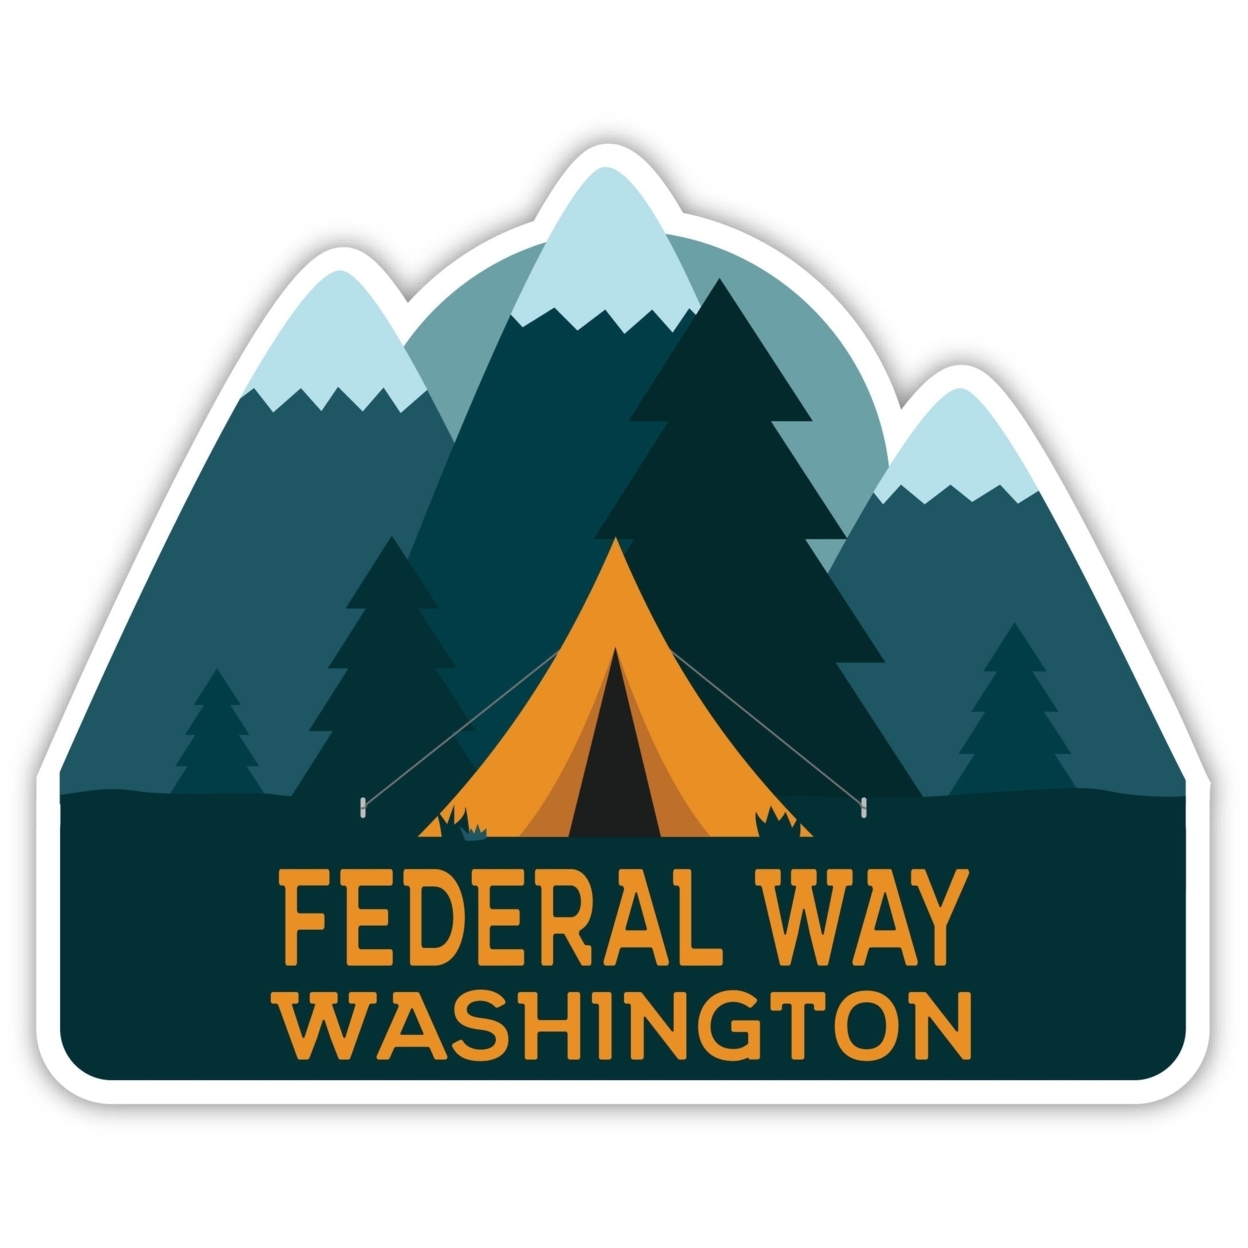 Federal Way Washington Souvenir Decorative Stickers (Choose Theme And Size) - 4-Pack, 6-Inch, Tent